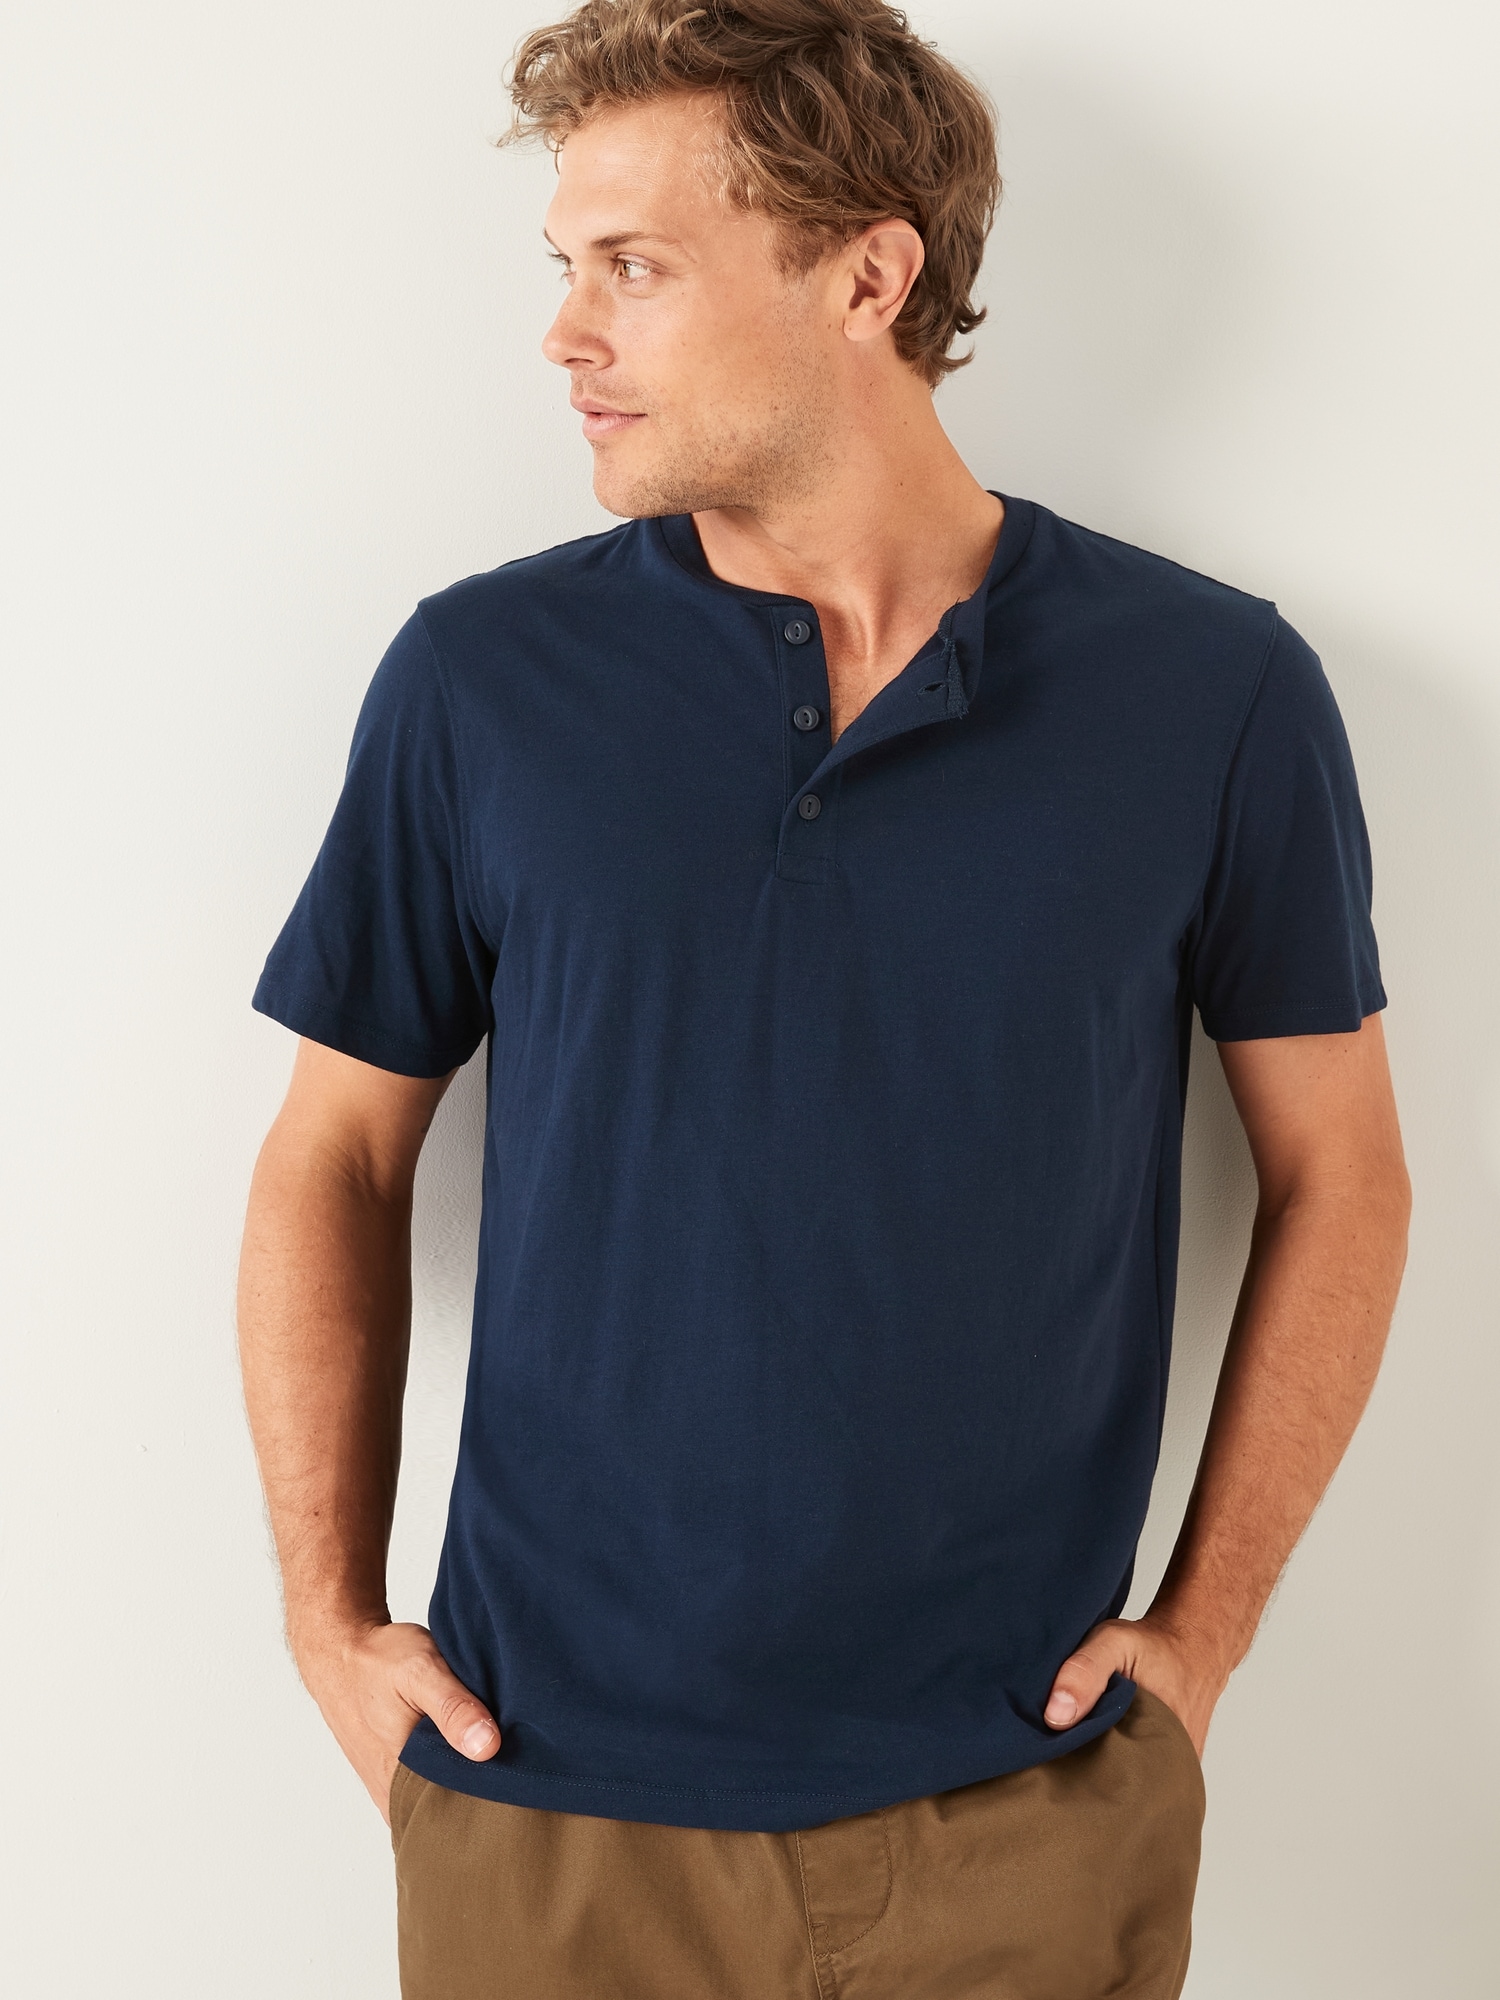 Old Navy Men's Beyond 4-Way Stretch Henley T-Shirt - - Size S